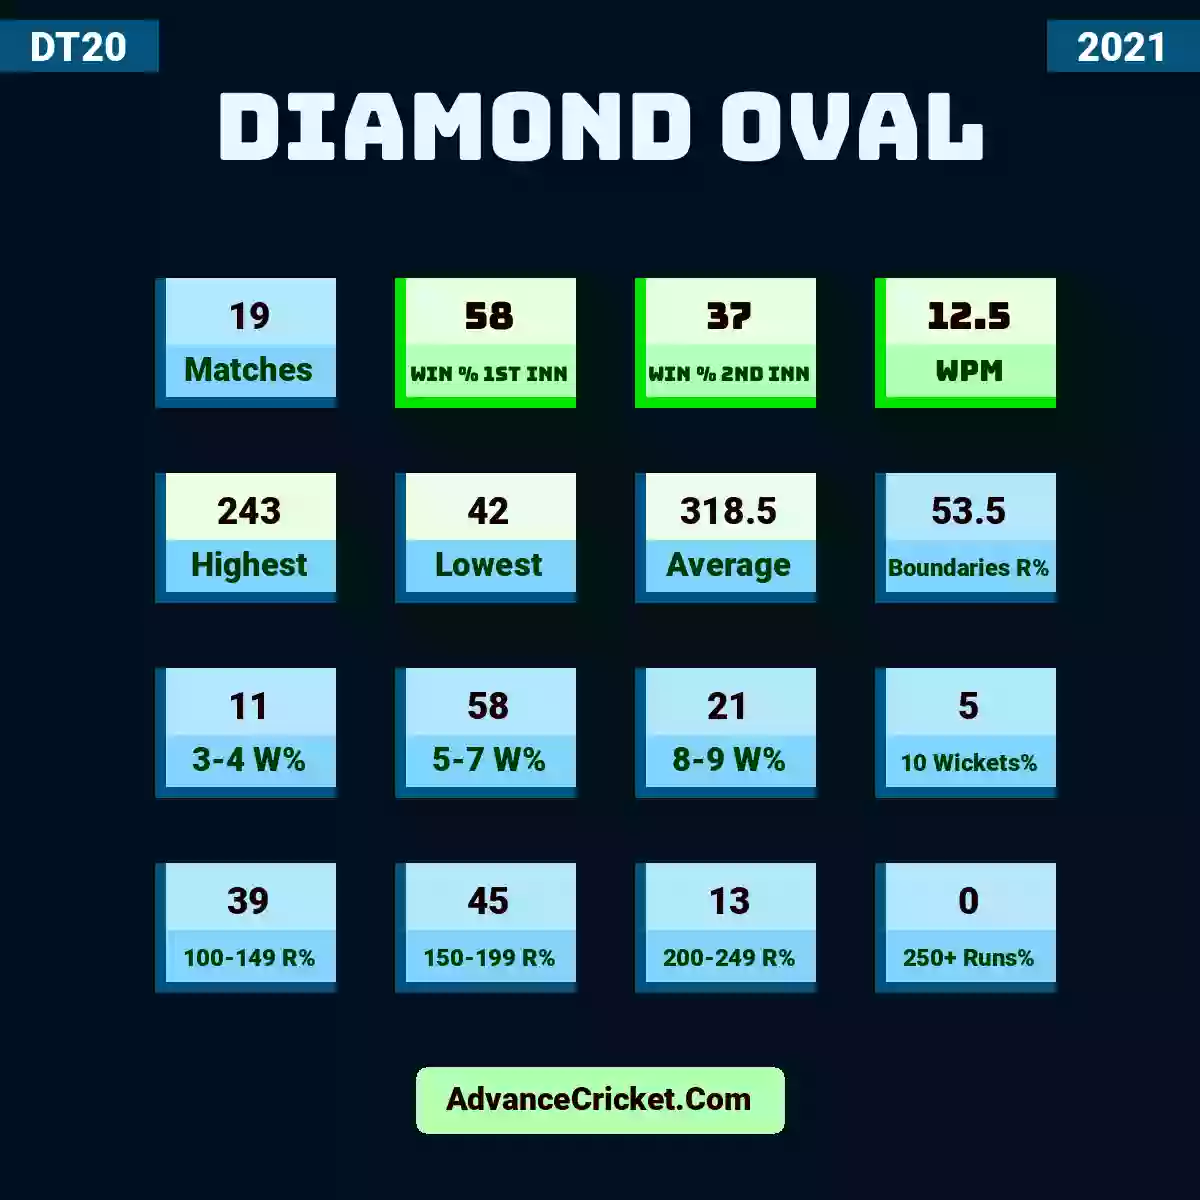 Image showing Diamond Oval with Matches: 19, Win % 1st Inn: 58, Win % 2nd Inn: 37, WPM: 12.5, Highest: 243, Lowest: 42, Average: 318.5, Boundaries R%: 53.5, 3-4 W%: 11, 5-7 W%: 58, 8-9 W%: 21, 10 Wickets%: 5, 100-149 R%: 39, 150-199 R%: 45, 200-249 R%: 13, 250+ Runs%: 0.